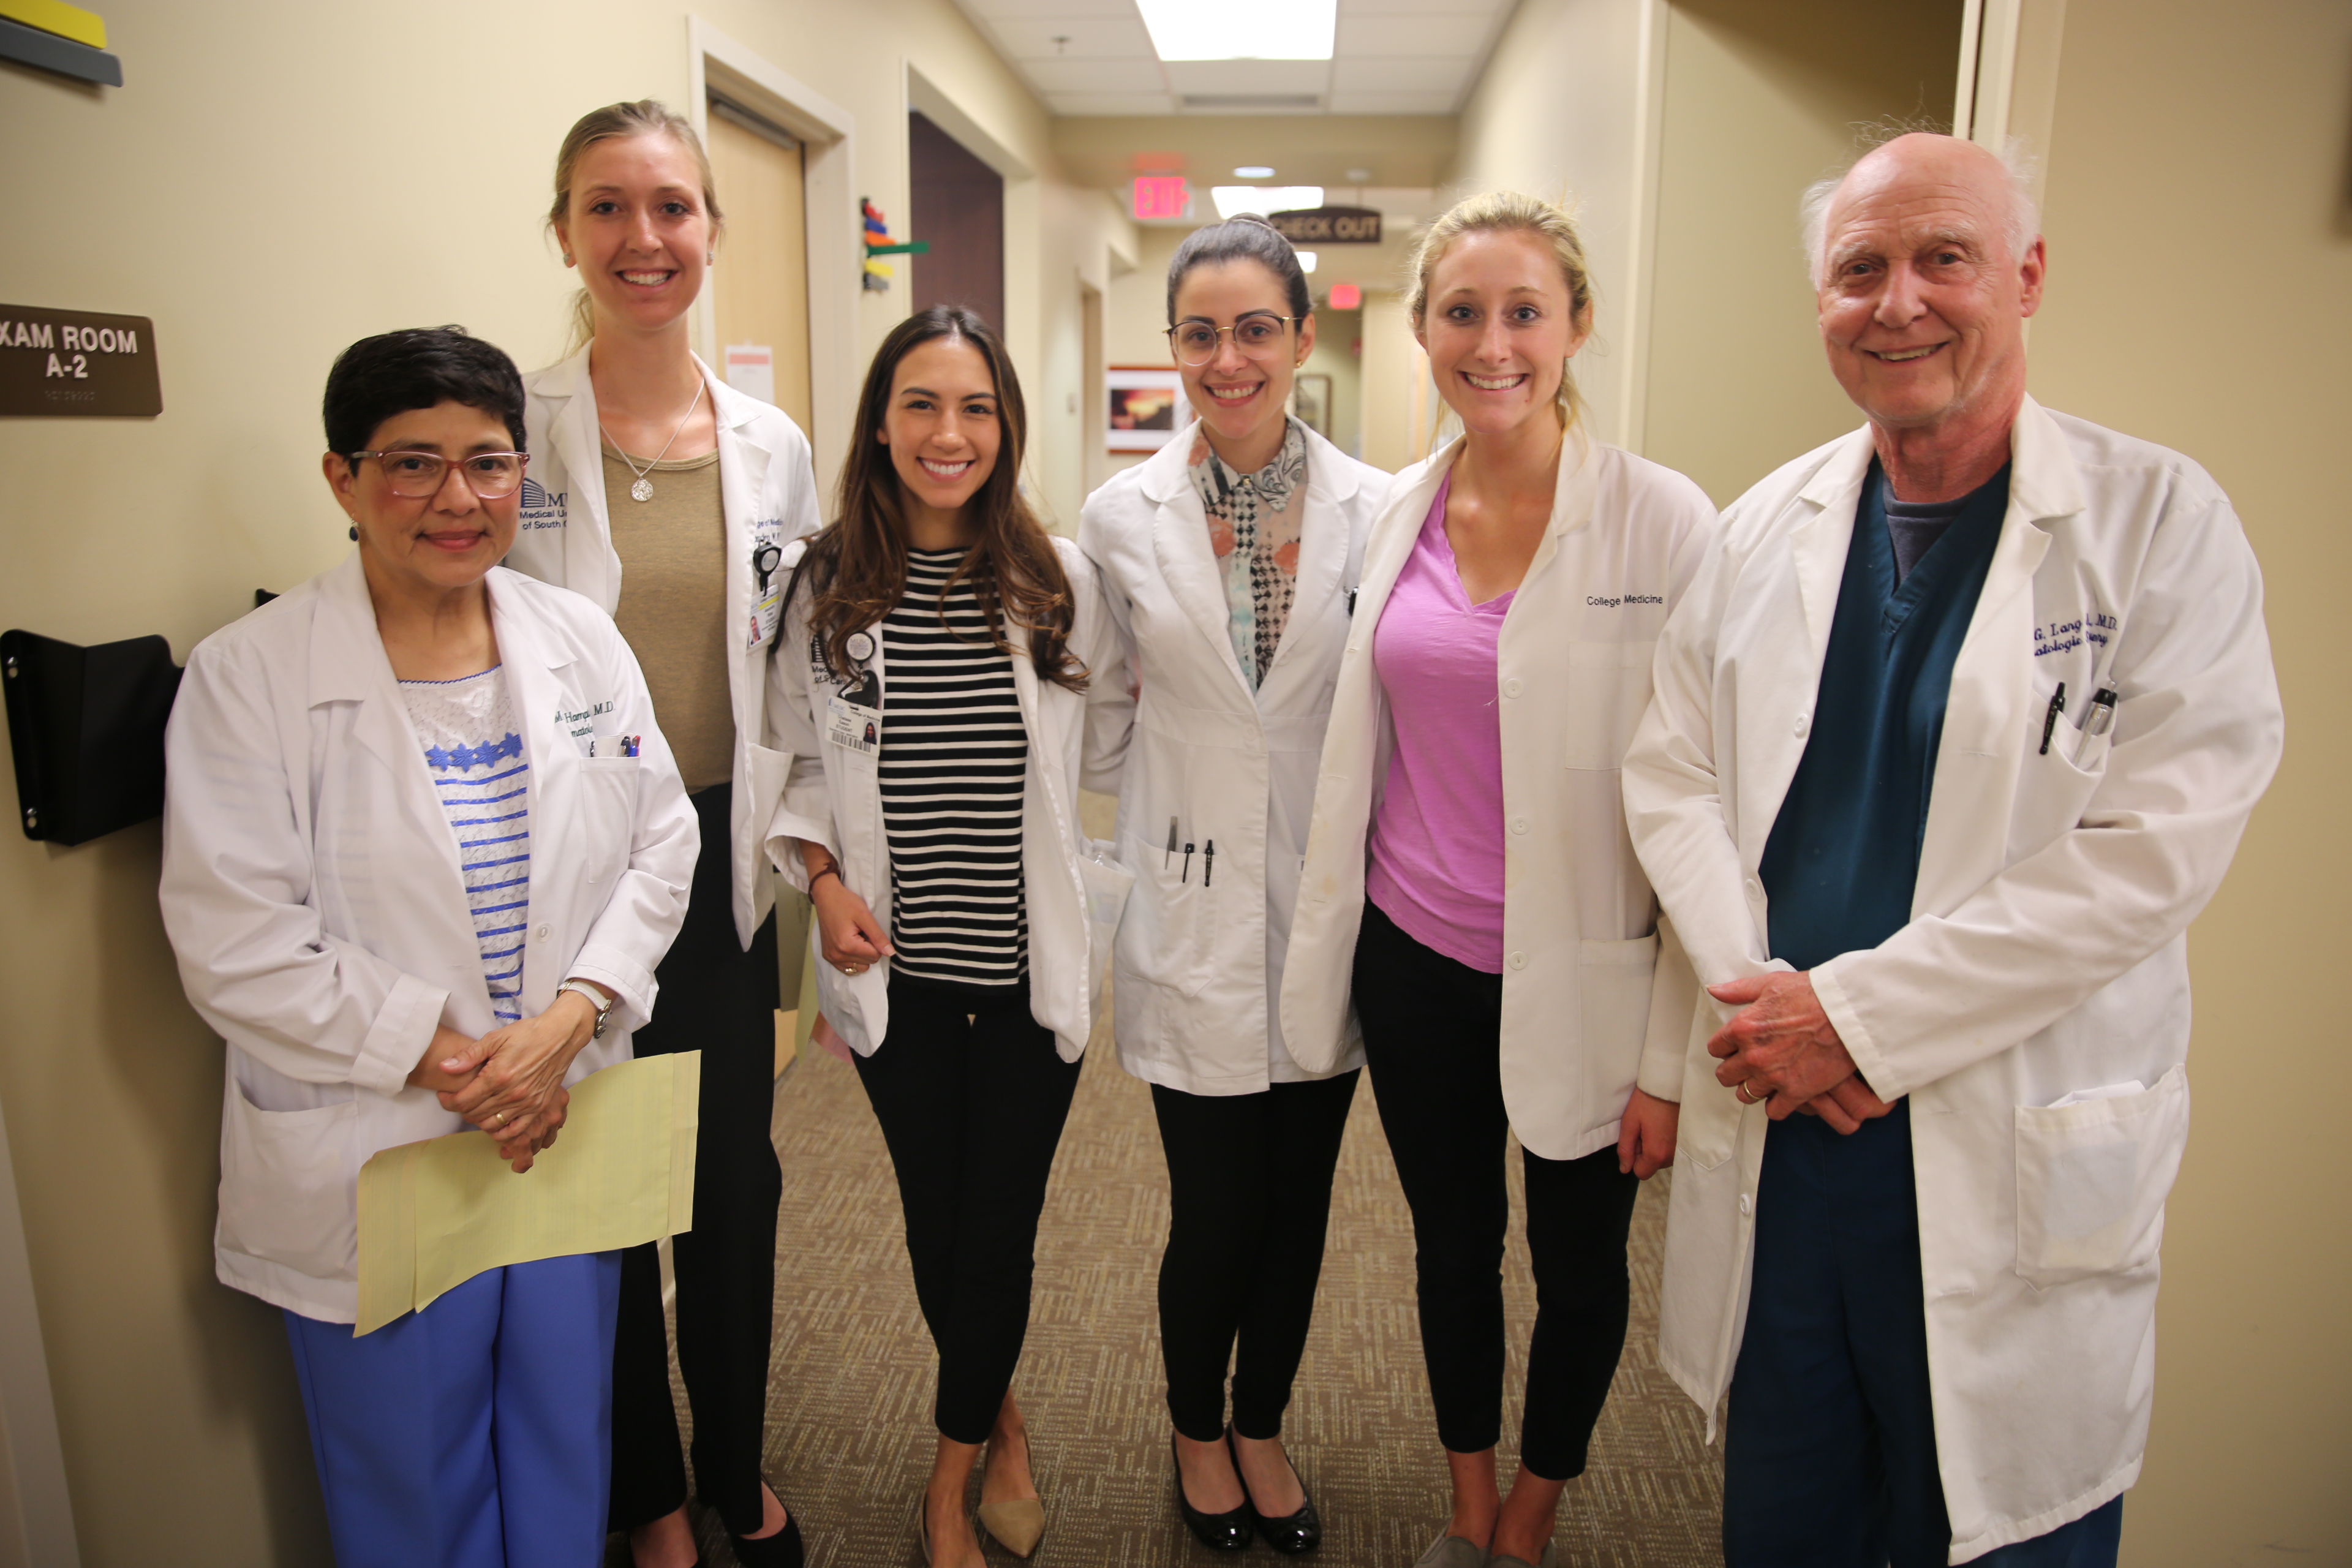 Drs. Pearon Lang, Hampton and Rahbar volunteered their time at the Skin Cancer Screening Organized by Dr. Todd Schlesinger, CCMS Member and SCMA President